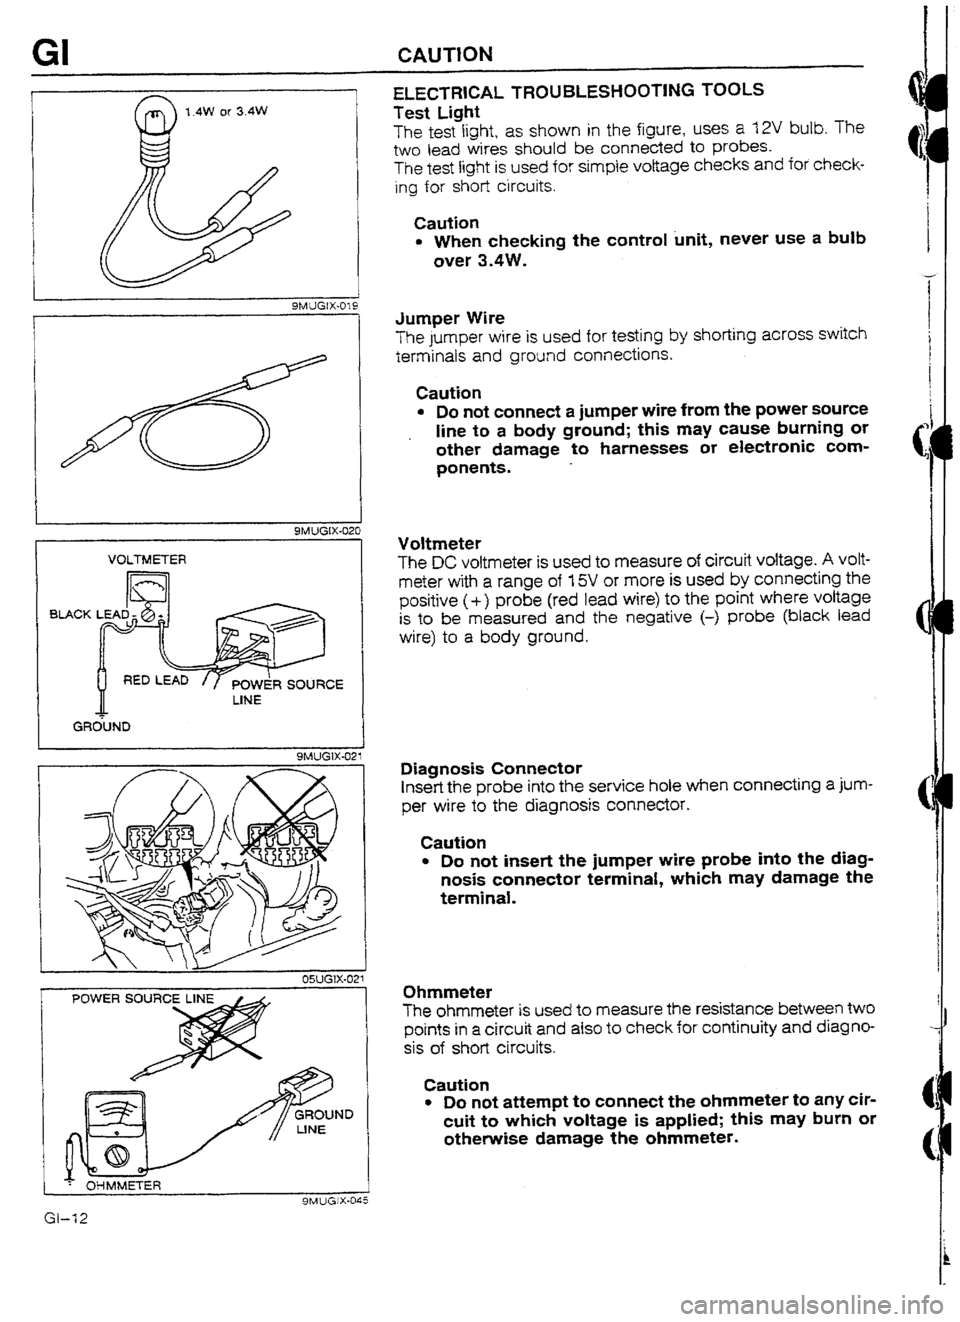 MAZDA 232 1990   Suplement User Guide GI CAUTKN 
SMUGIX-a21 
I VOLTMETER 
1 9MUGlX-021 
POWER SOURC 
ELECTRICAL TROUBLESHOOTING TOOLS 
Test Light 
The test light, as shown in the figure, uses a f2V bulb. The 
two lead wires should be conn